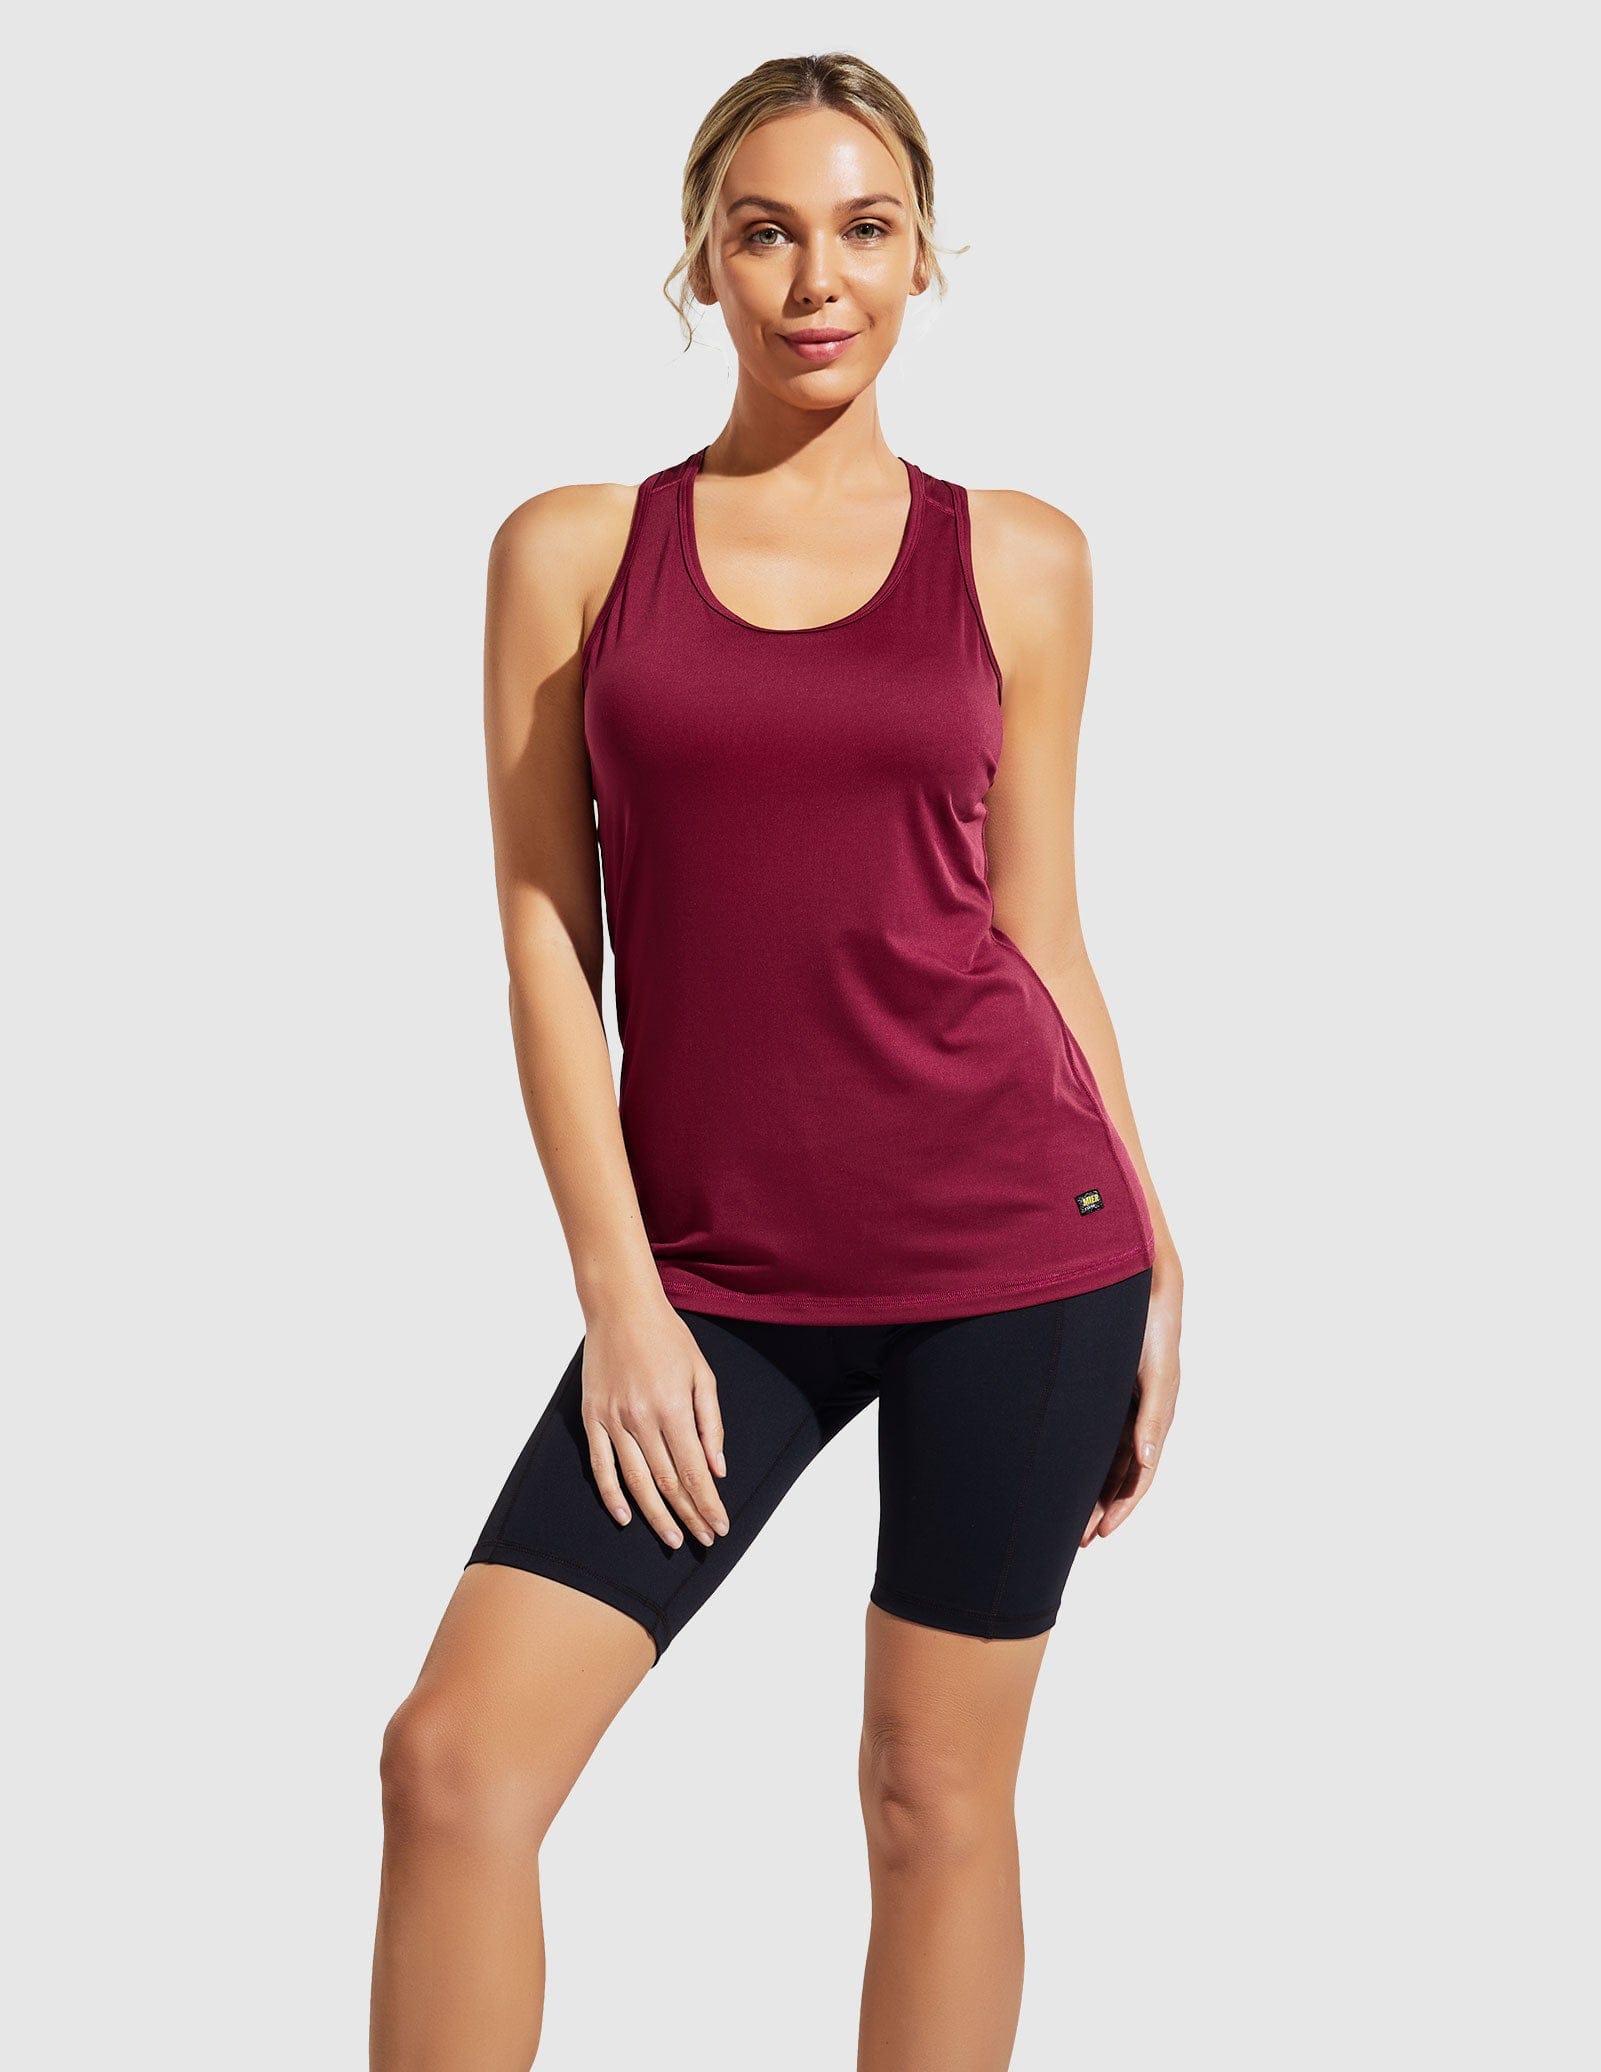 RQYYD Reduced Workout Tank Tops for Women Sleeveless Racerback